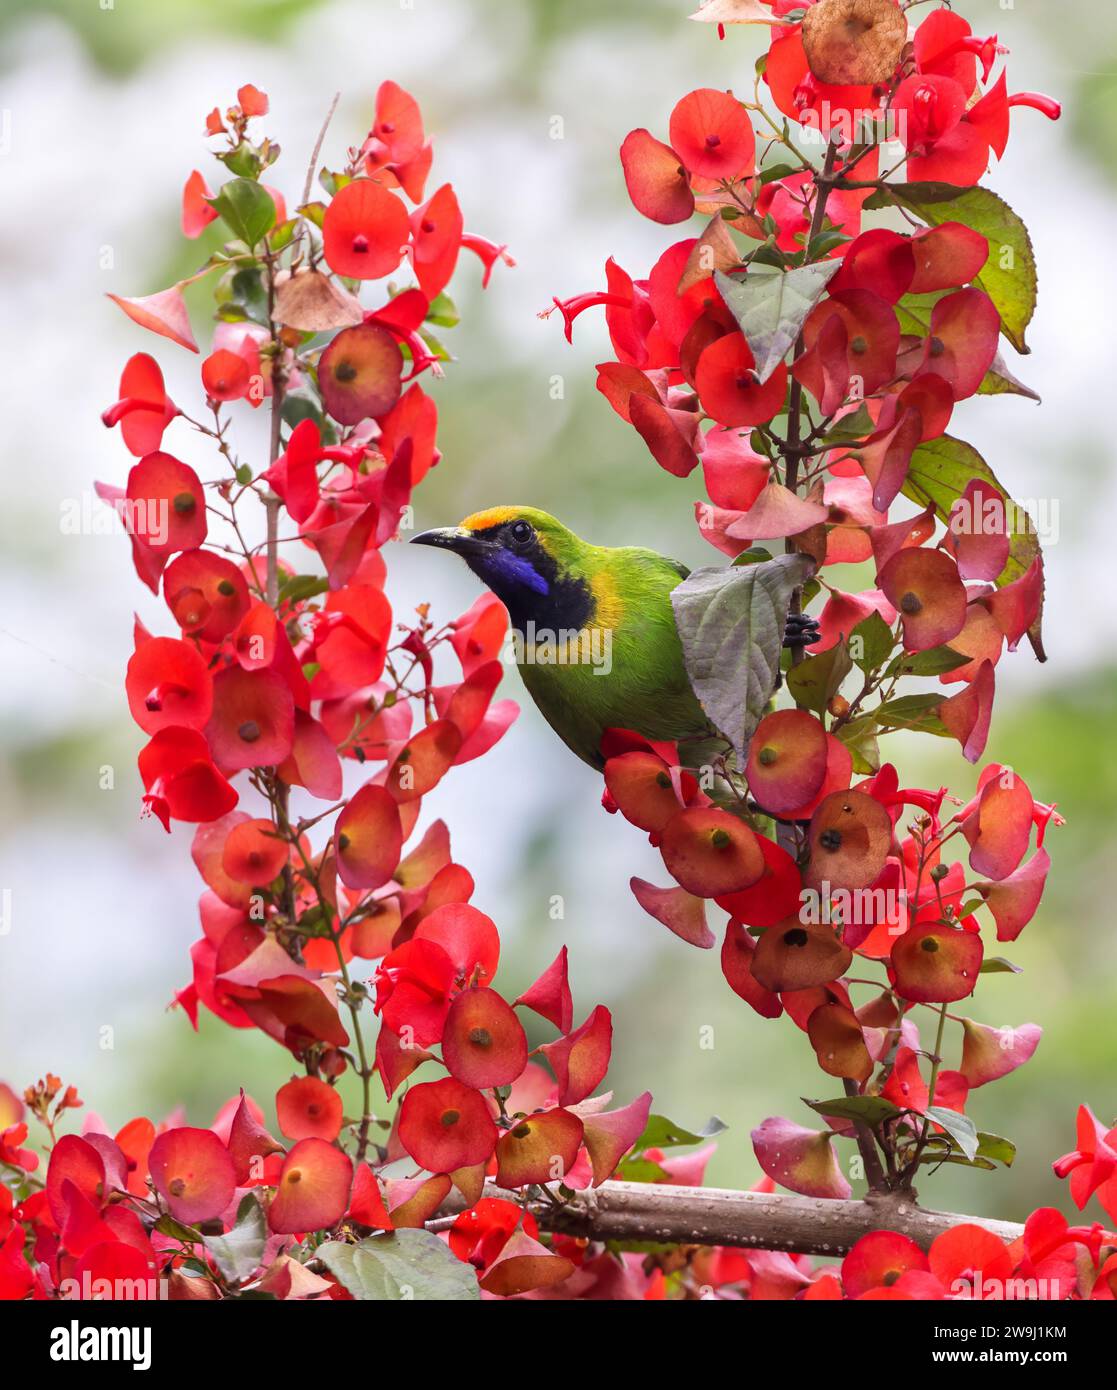 golden-fronted Leafbird(Chloropsis aurifrons) are common resident breeder in India, Sri Lanka, and parts of Southeast Asia. Stock Photo